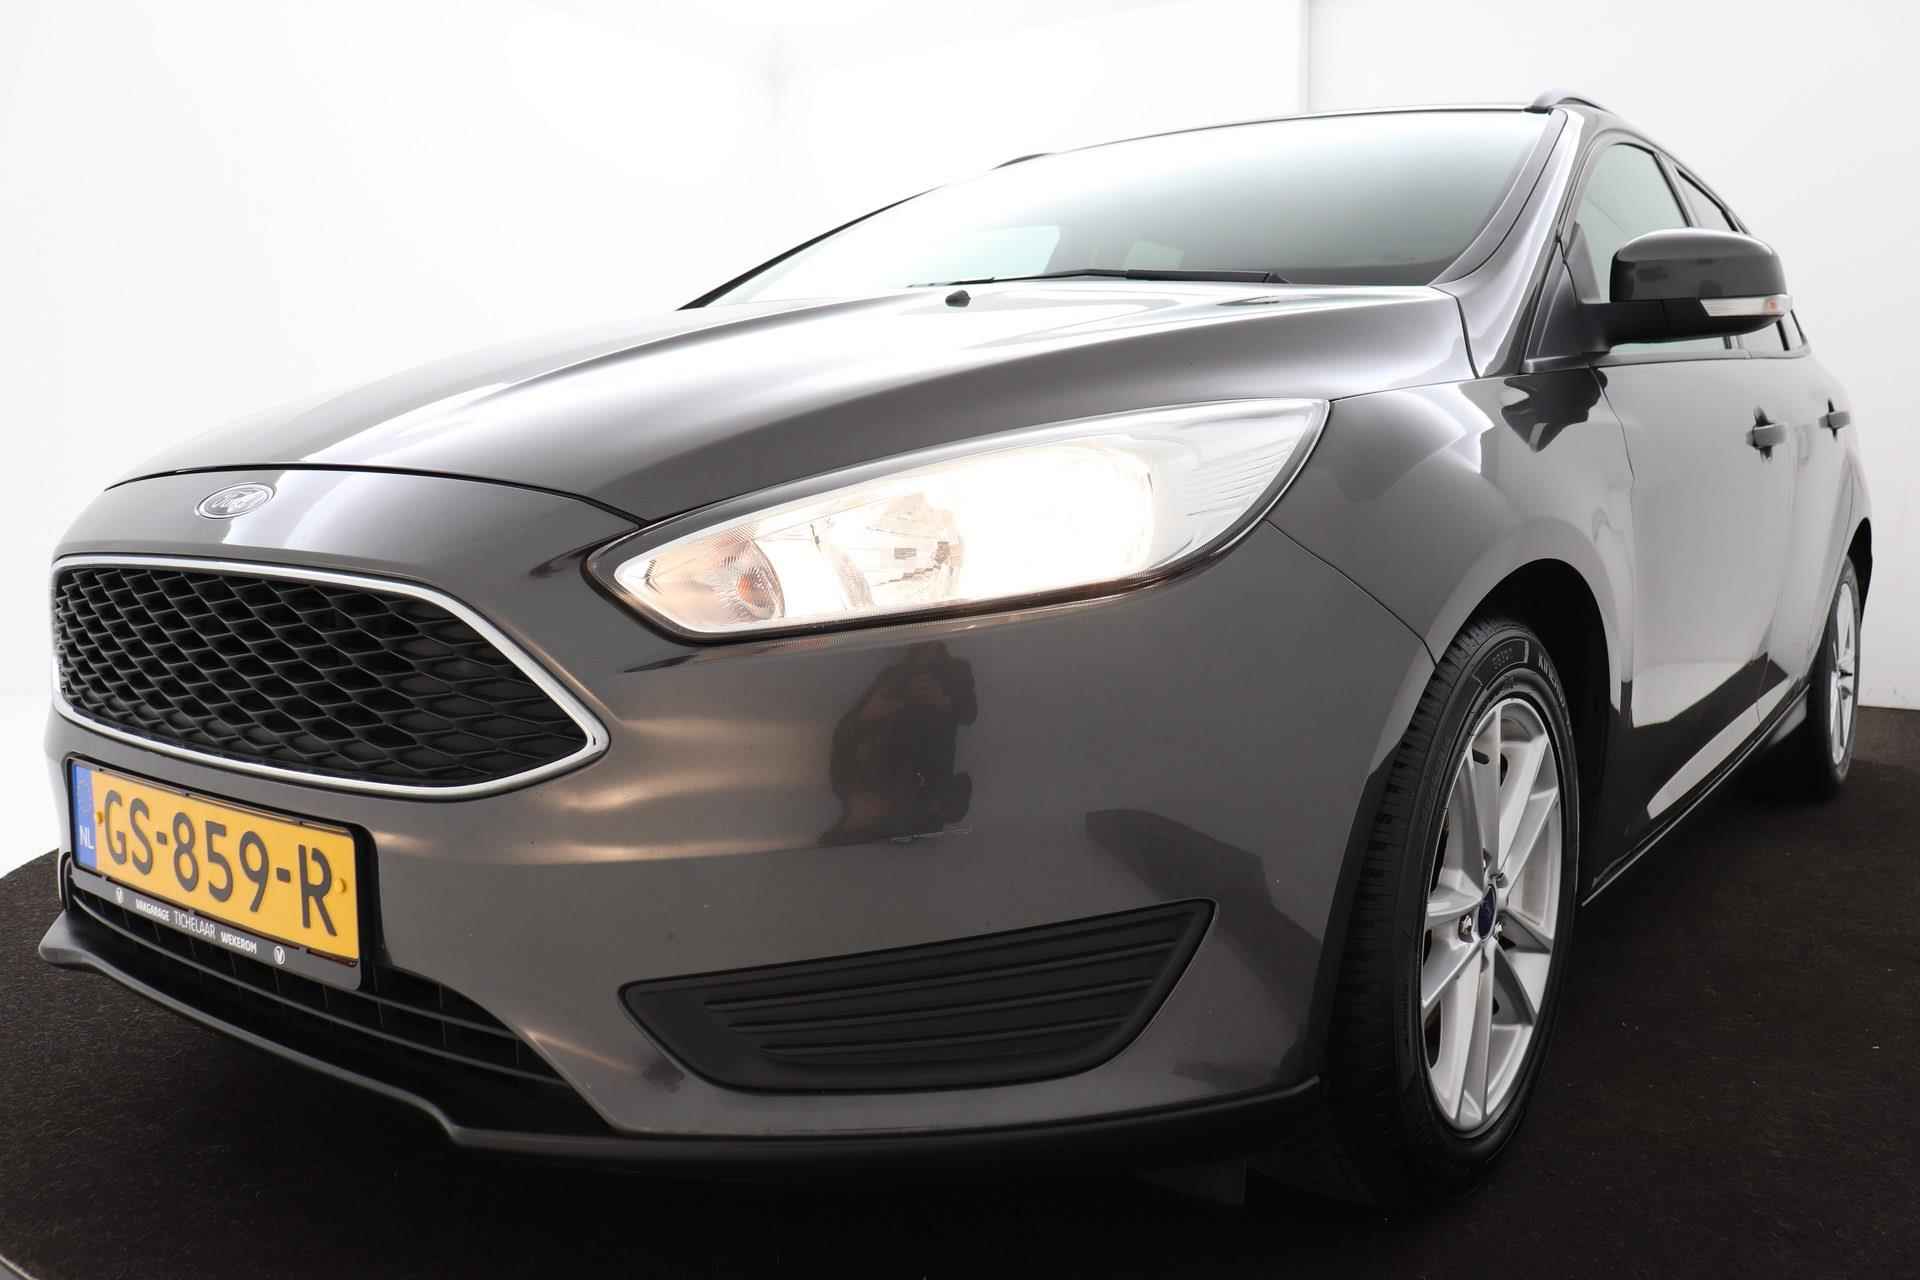 Ford Focus Wagon 1.0 Trend Edition | Org NL | Volledig Ond. | Airco | Cruise Control | - 30/36